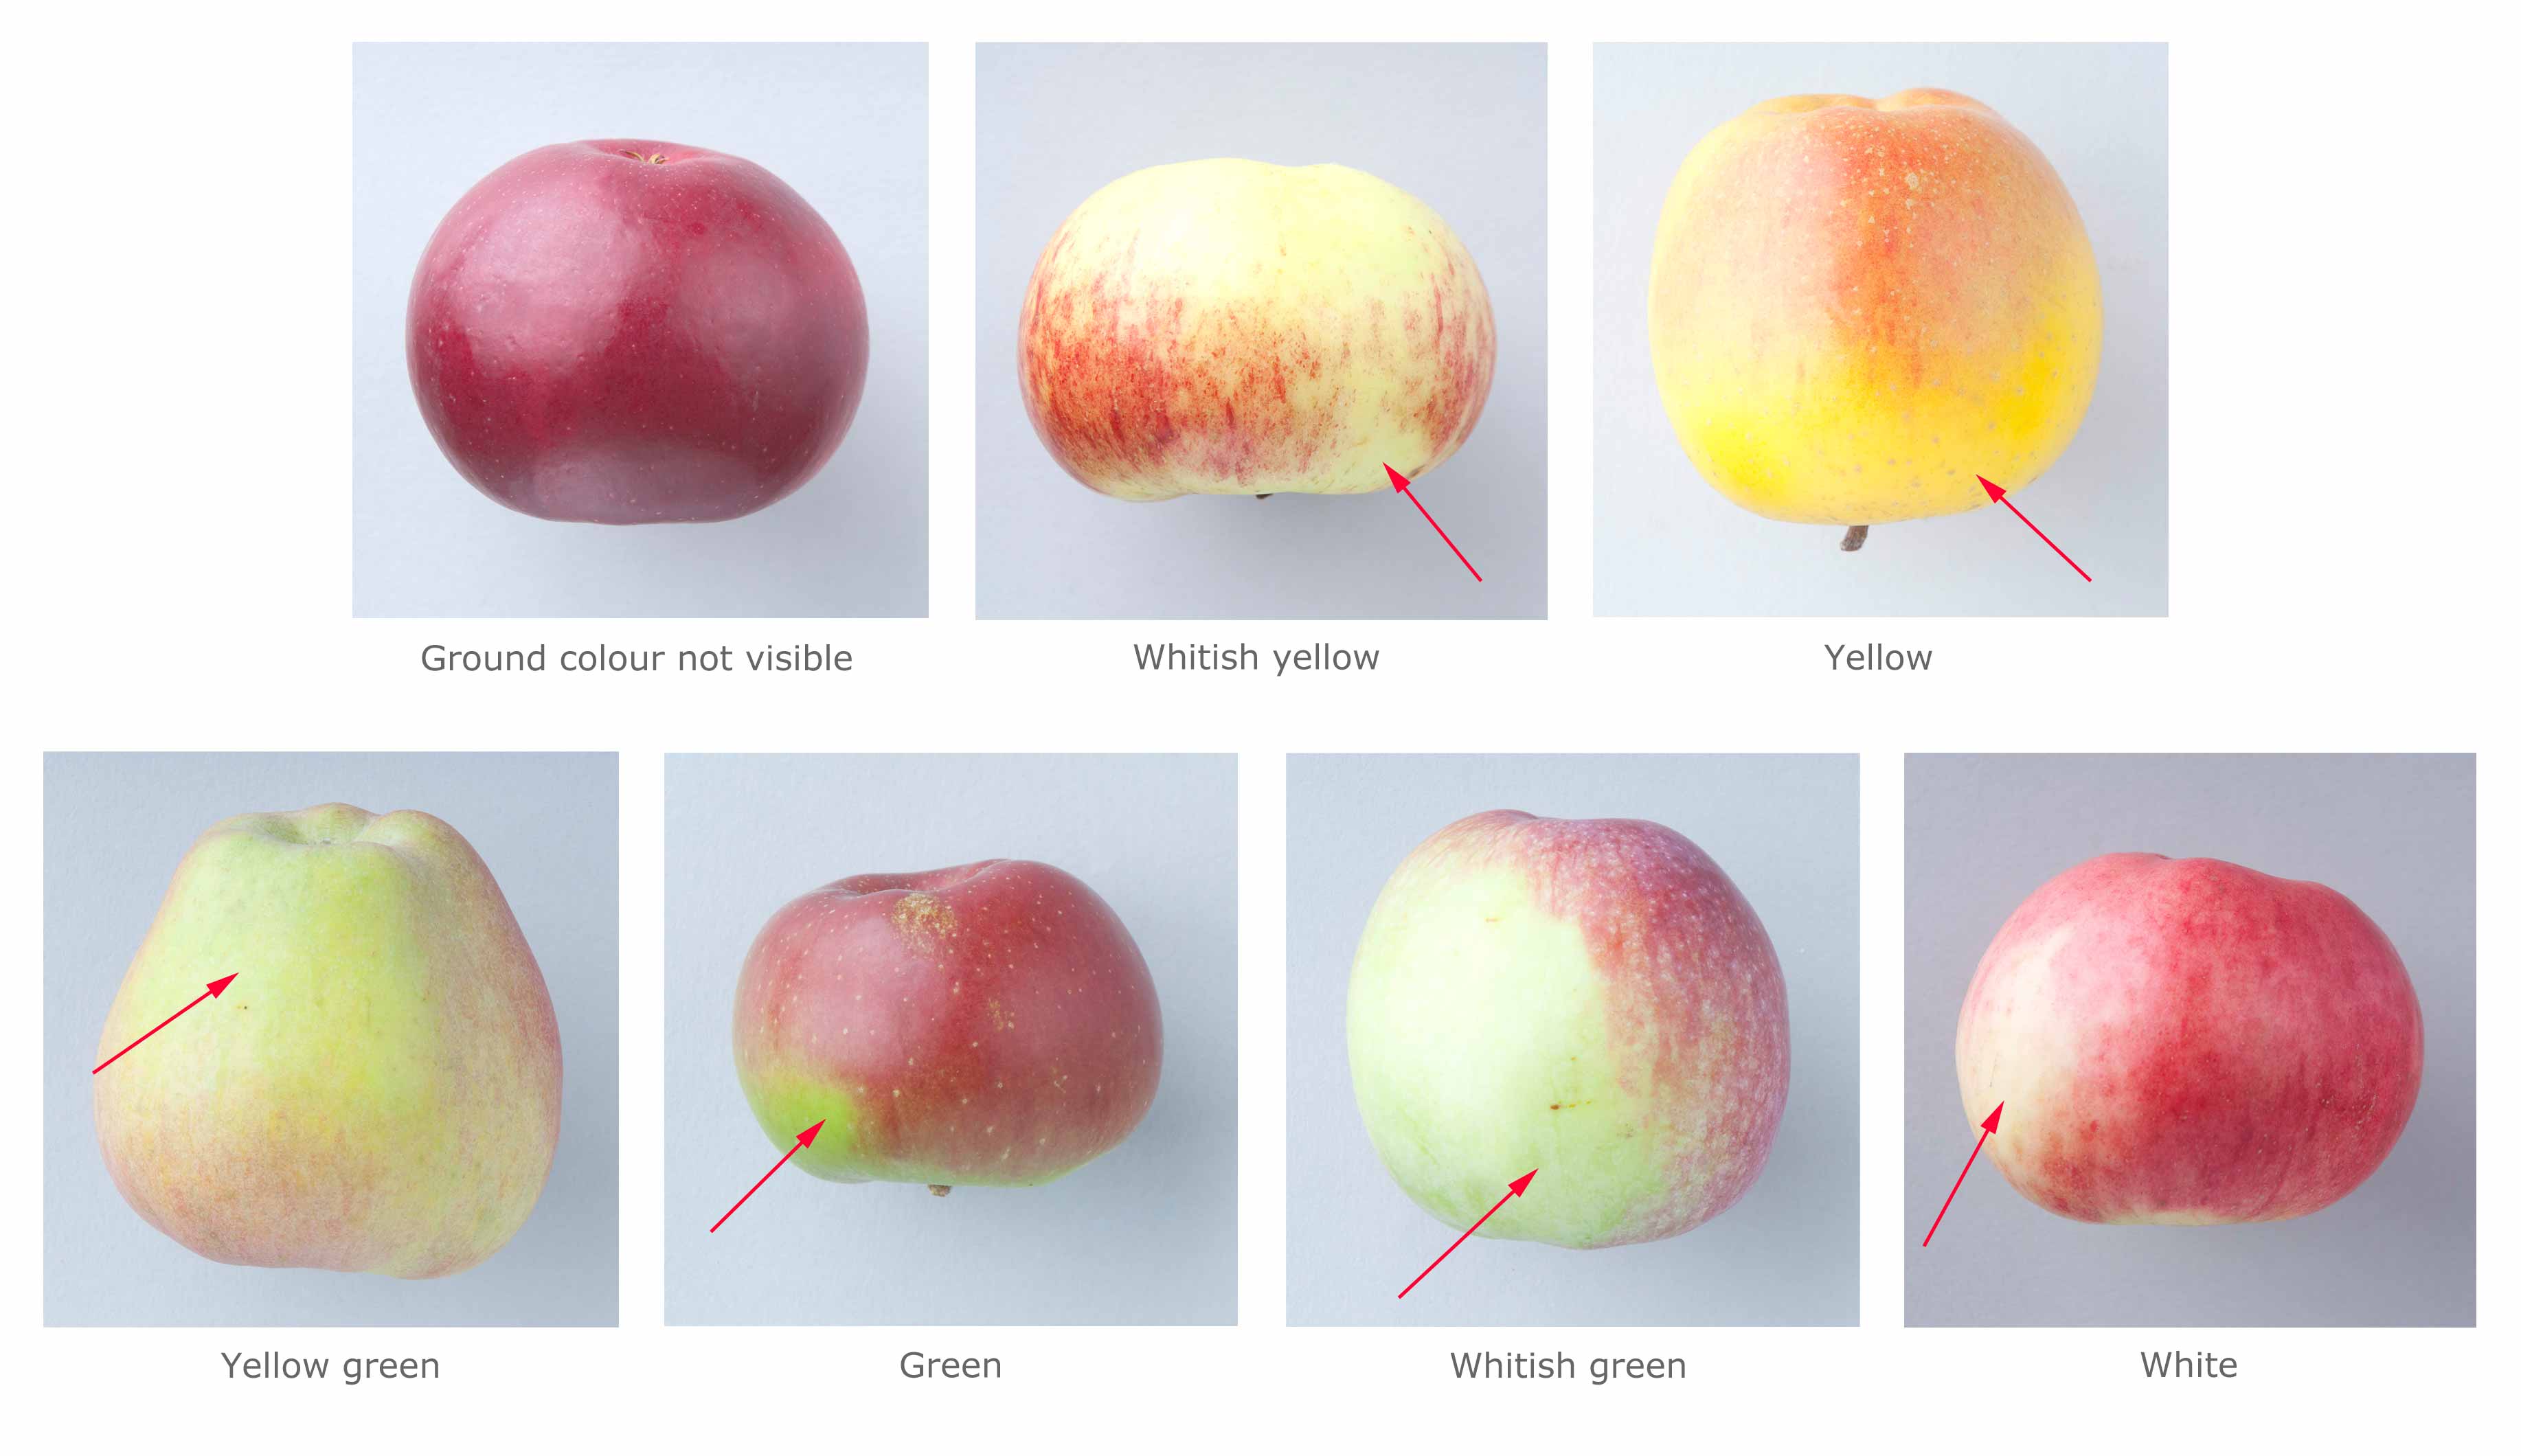 Apple Color - Western Agricultural Research Center